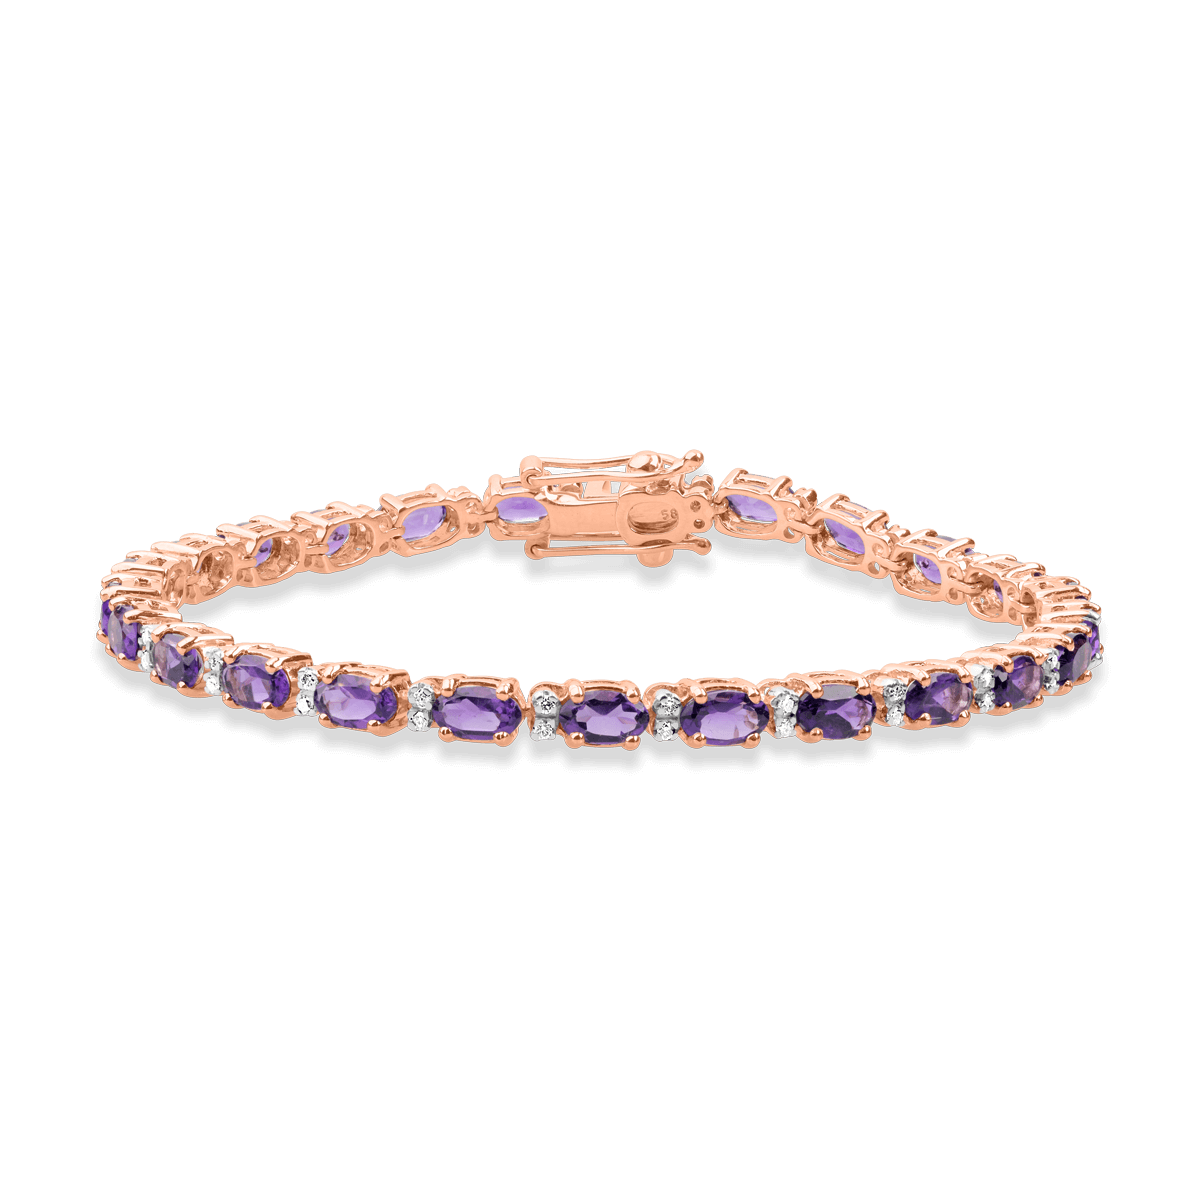 18K rose gold tennis bracelet with 5.38ct amethysts and 0.26ct diamonds